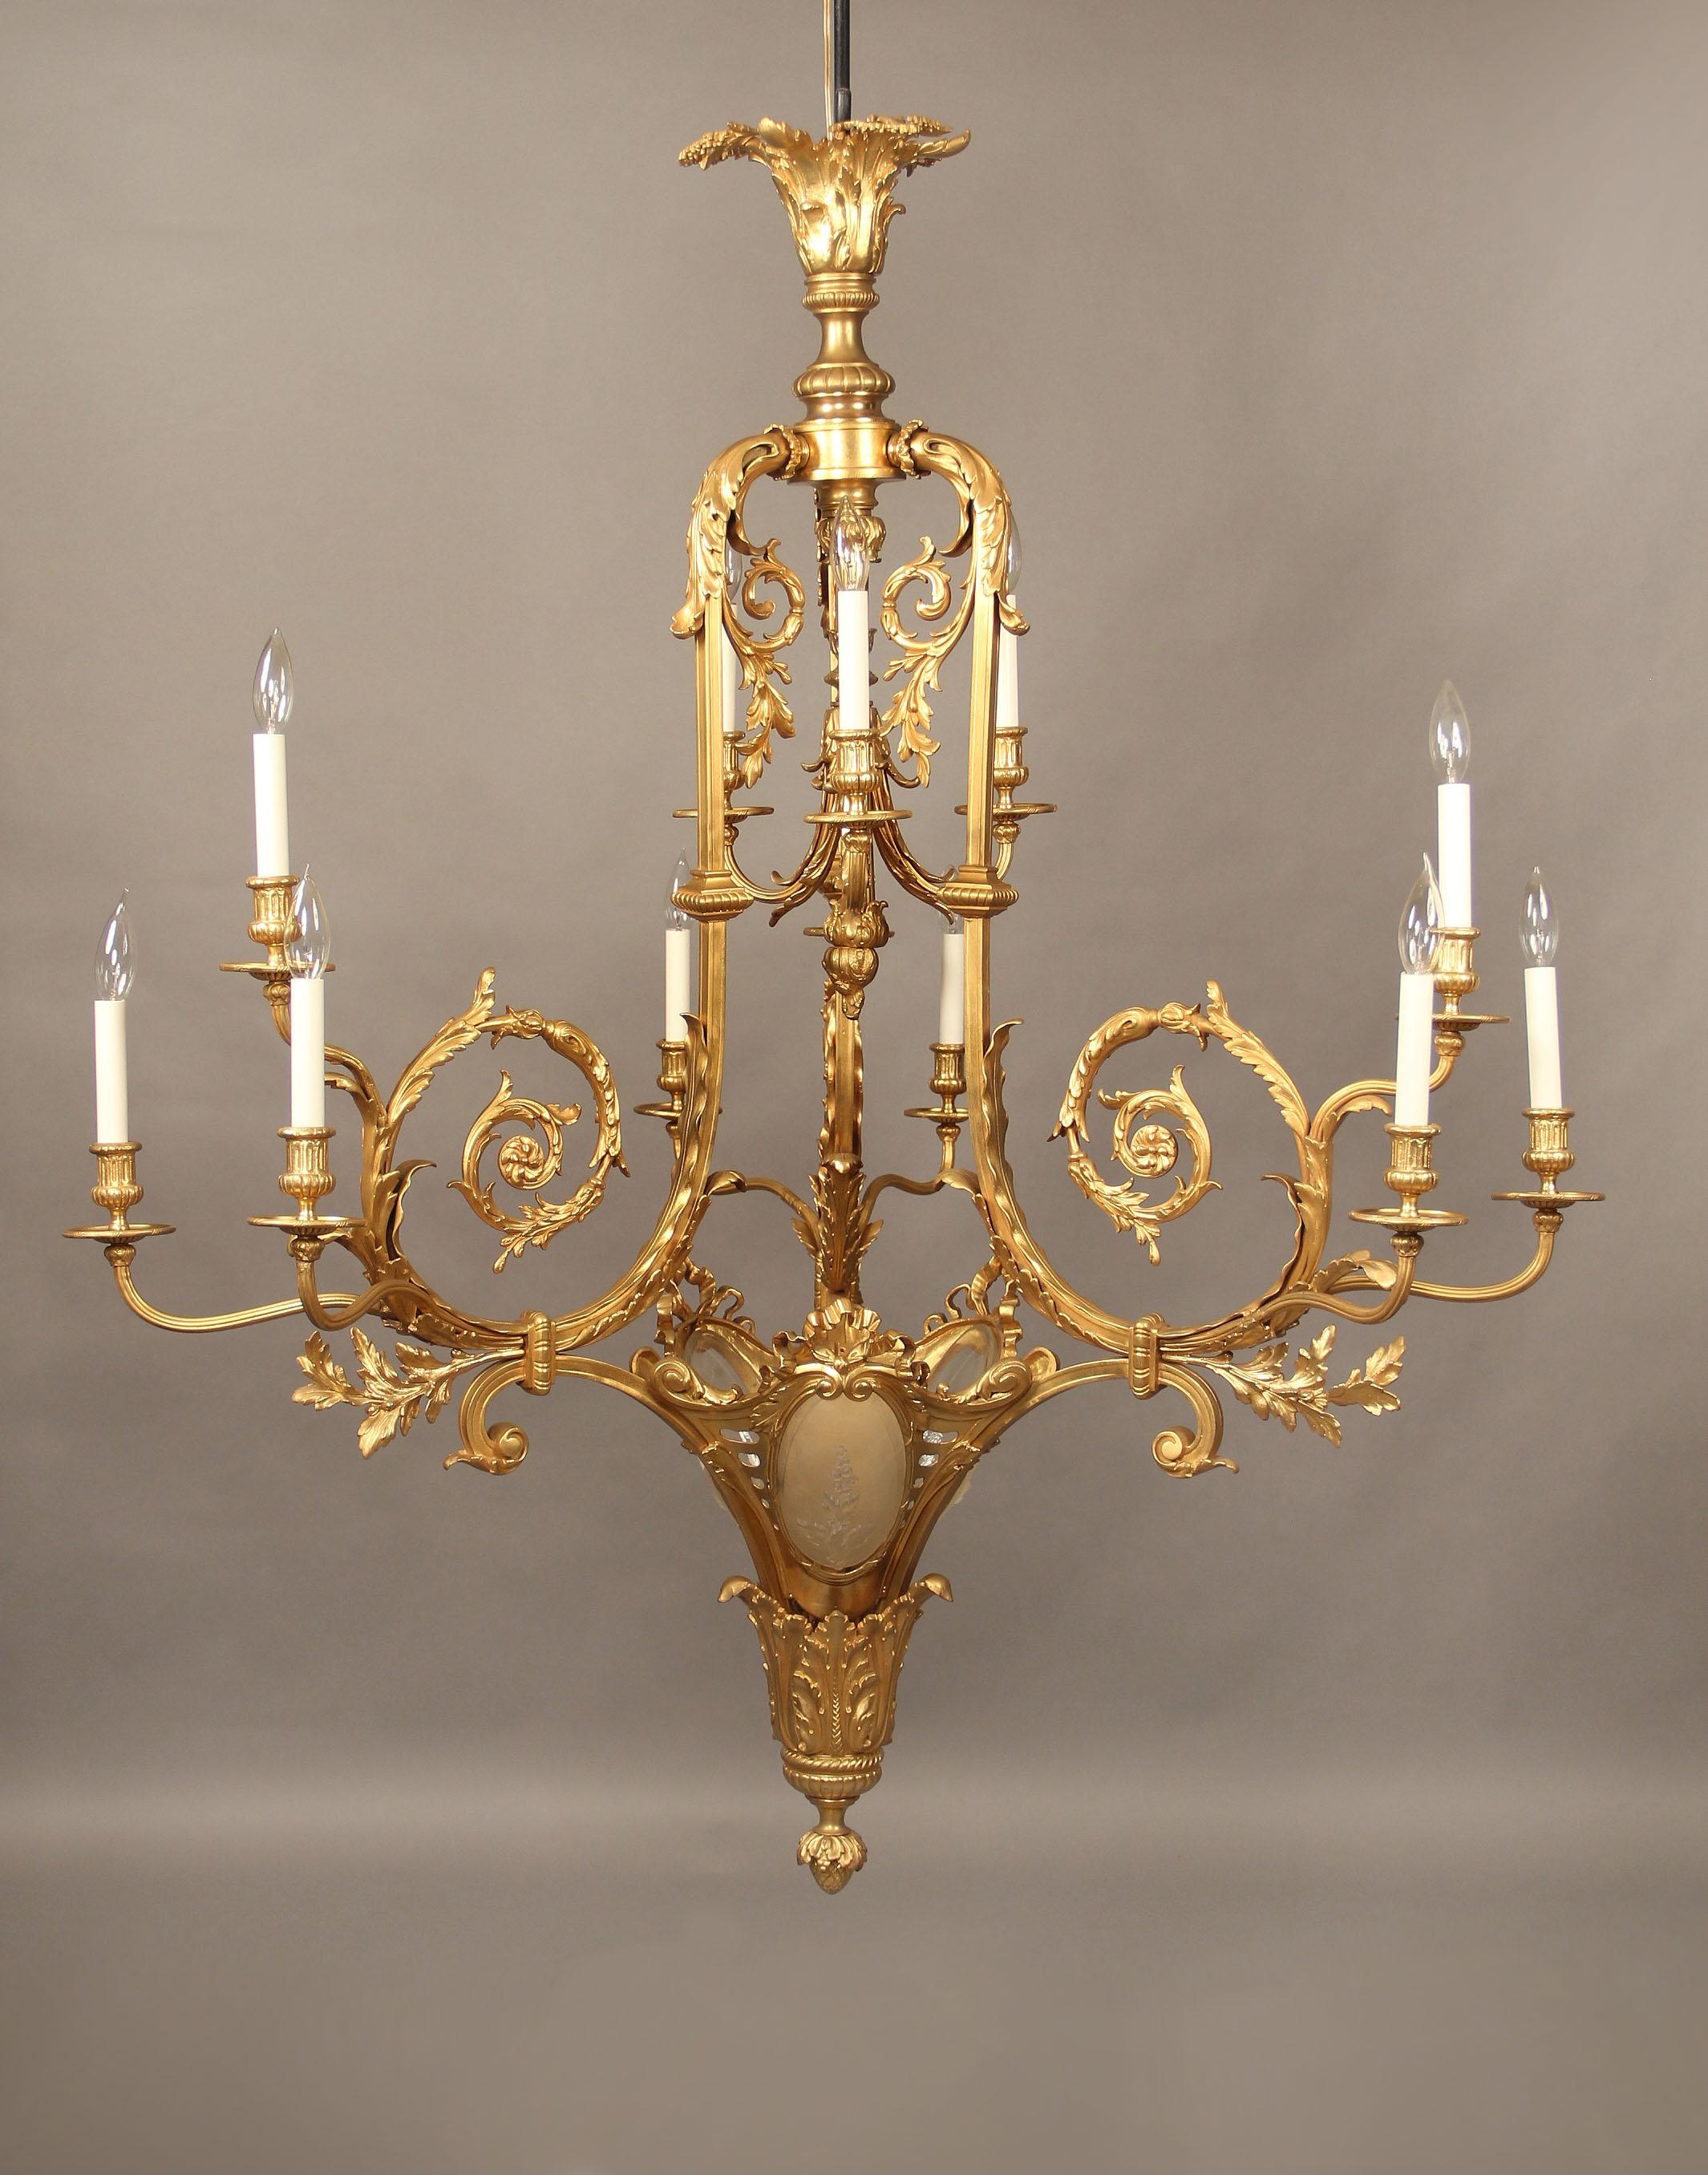 An exceptional early 20th century gilt bronze fifteen light chandelier.

Great quality bronze casts, foliate scrolled arms with an etched glass base, 12-tiered perimeter and three interior lights.

If you are looking for a chandelier, a lantern